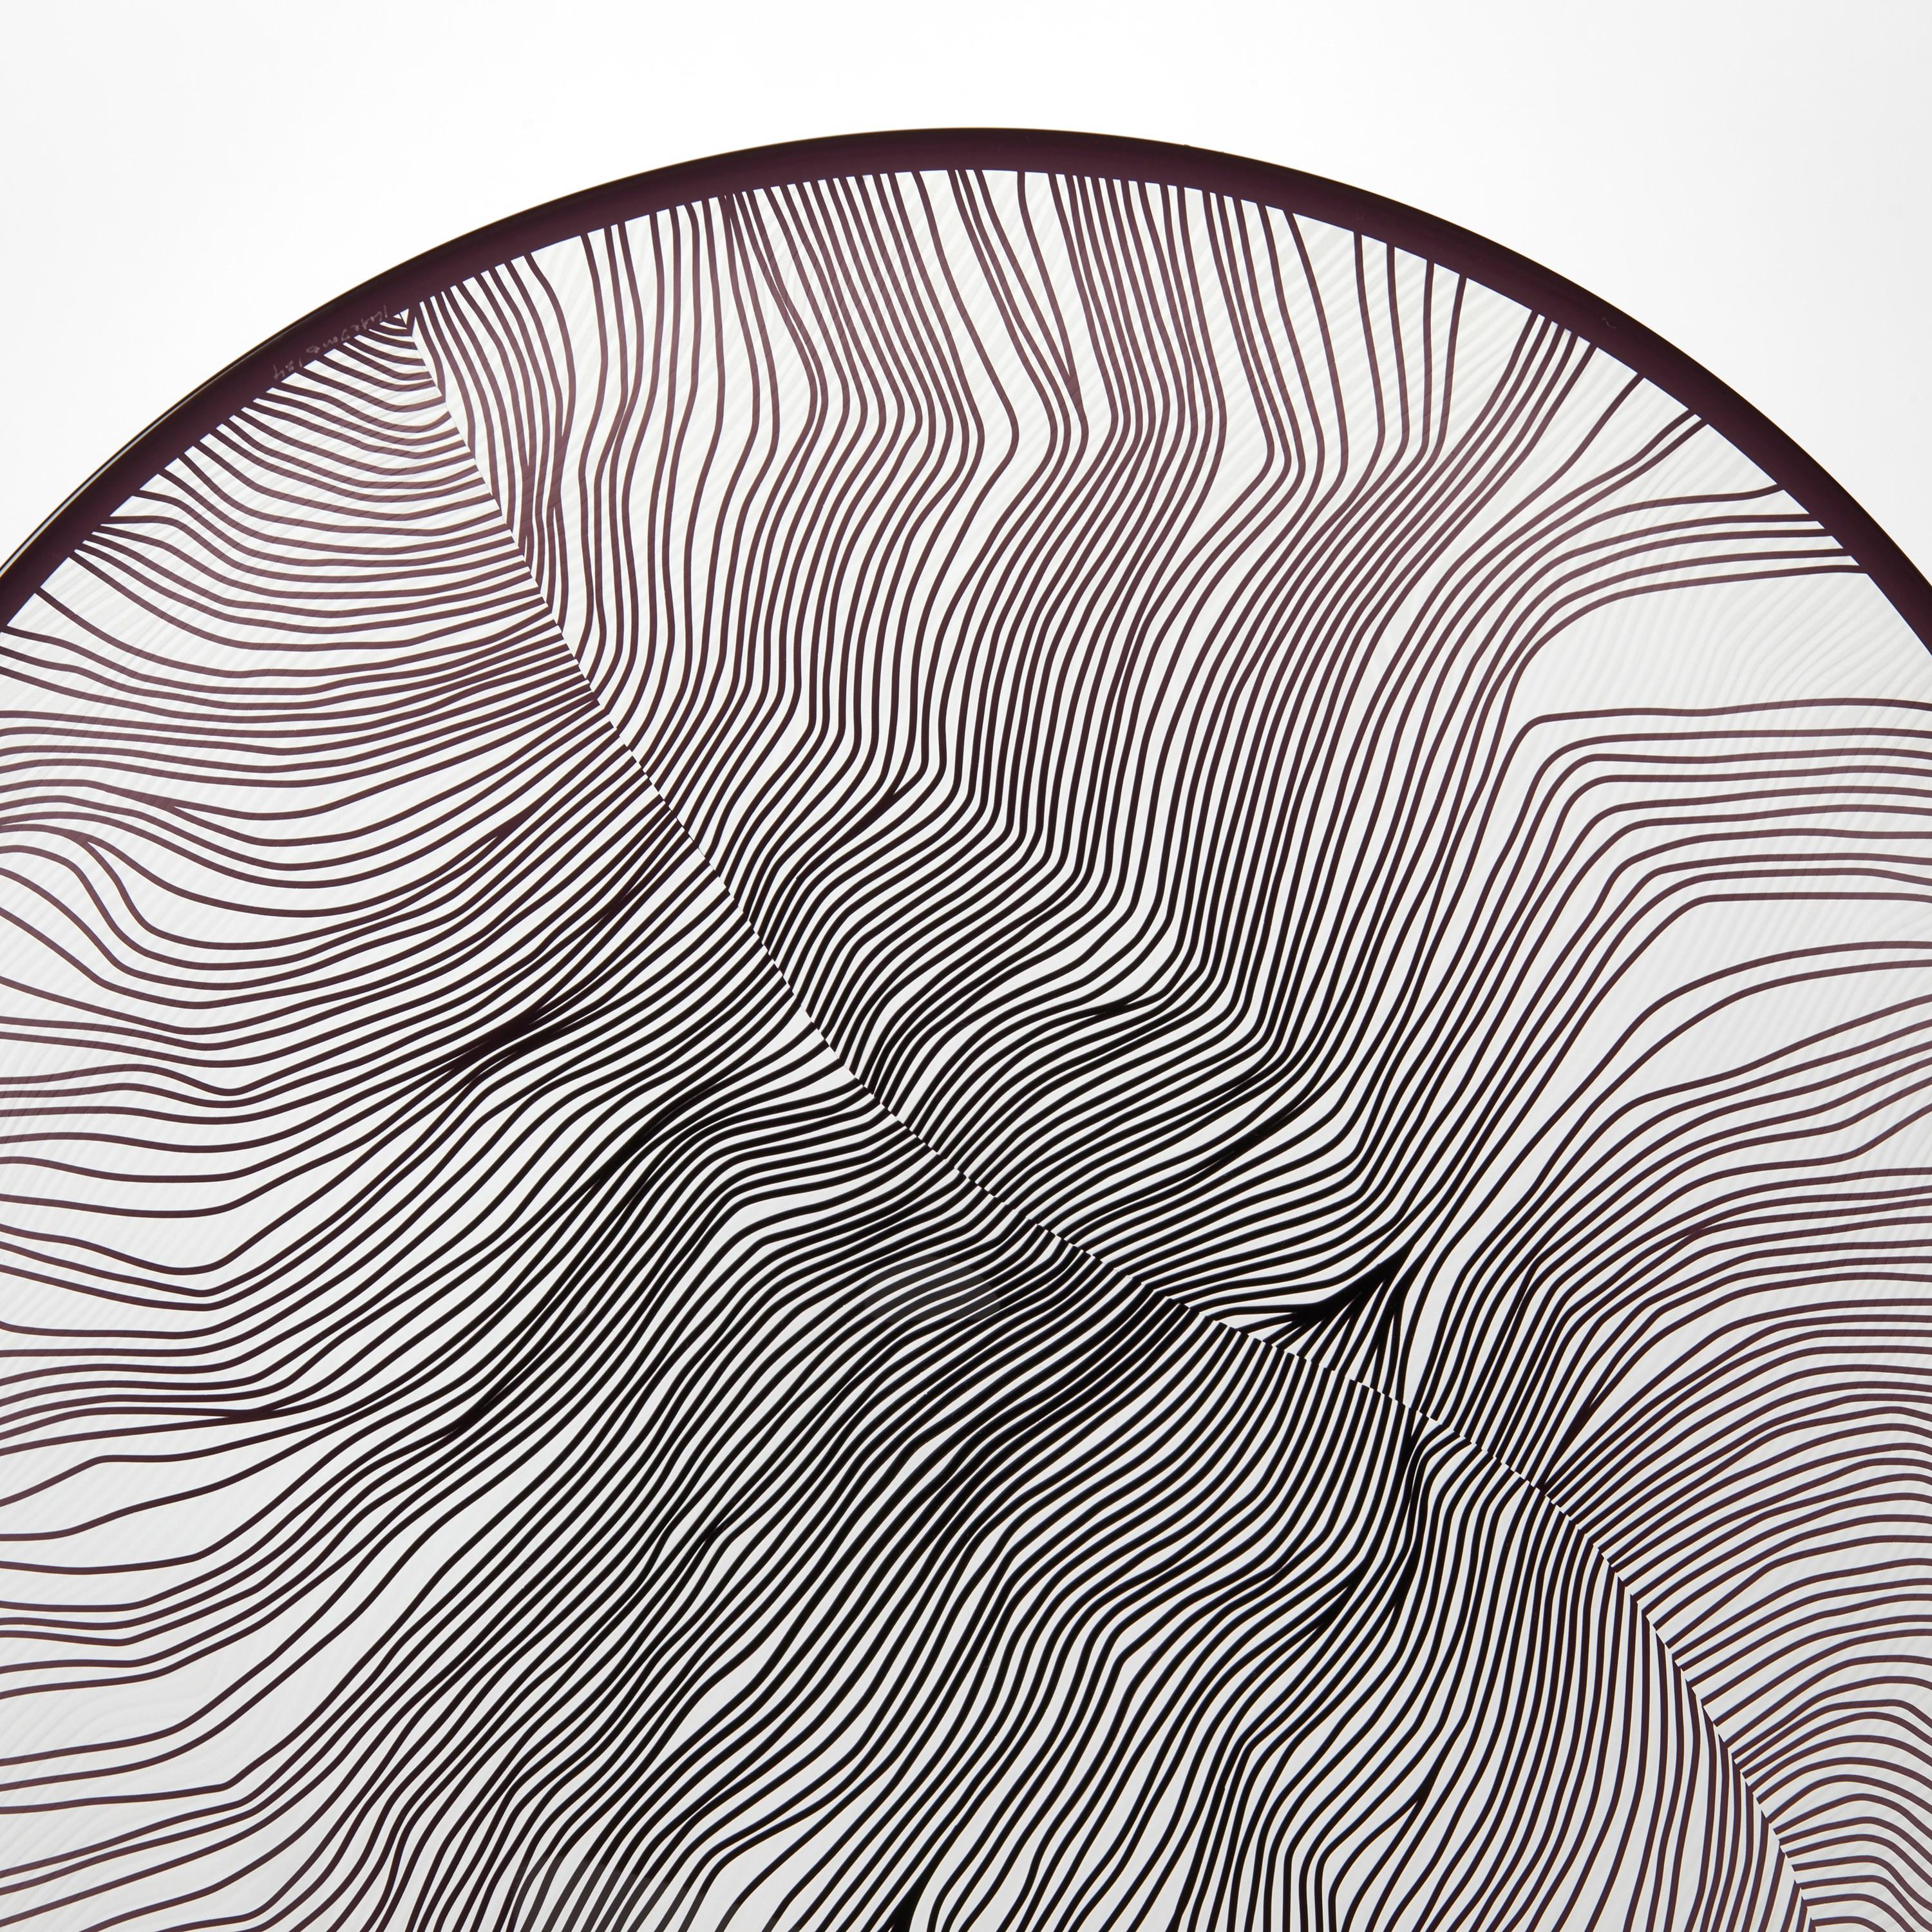 Hand-Crafted Solar Storm Monochrome IV, graphic abstract glass artwork + stand by Kate Jones For Sale